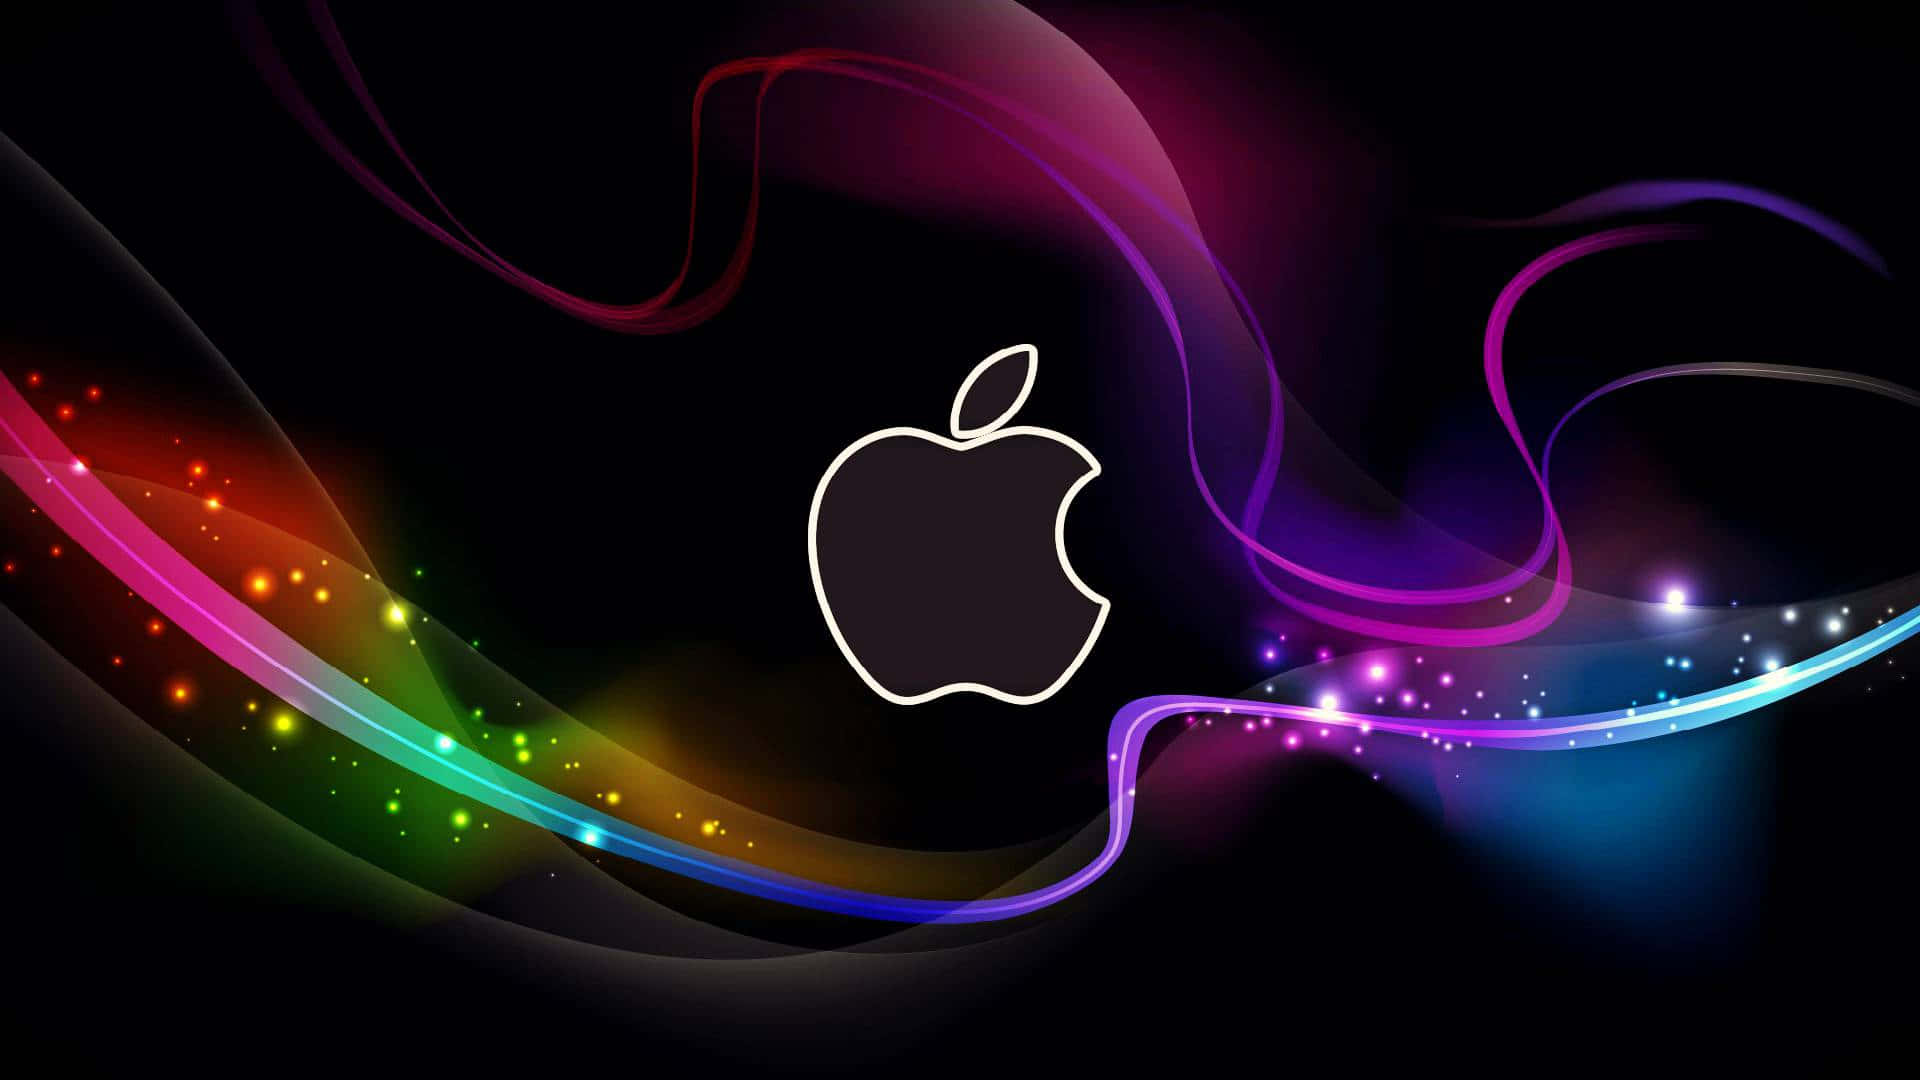 Cool Mac Logo Surrounded By Colorful Strings Background